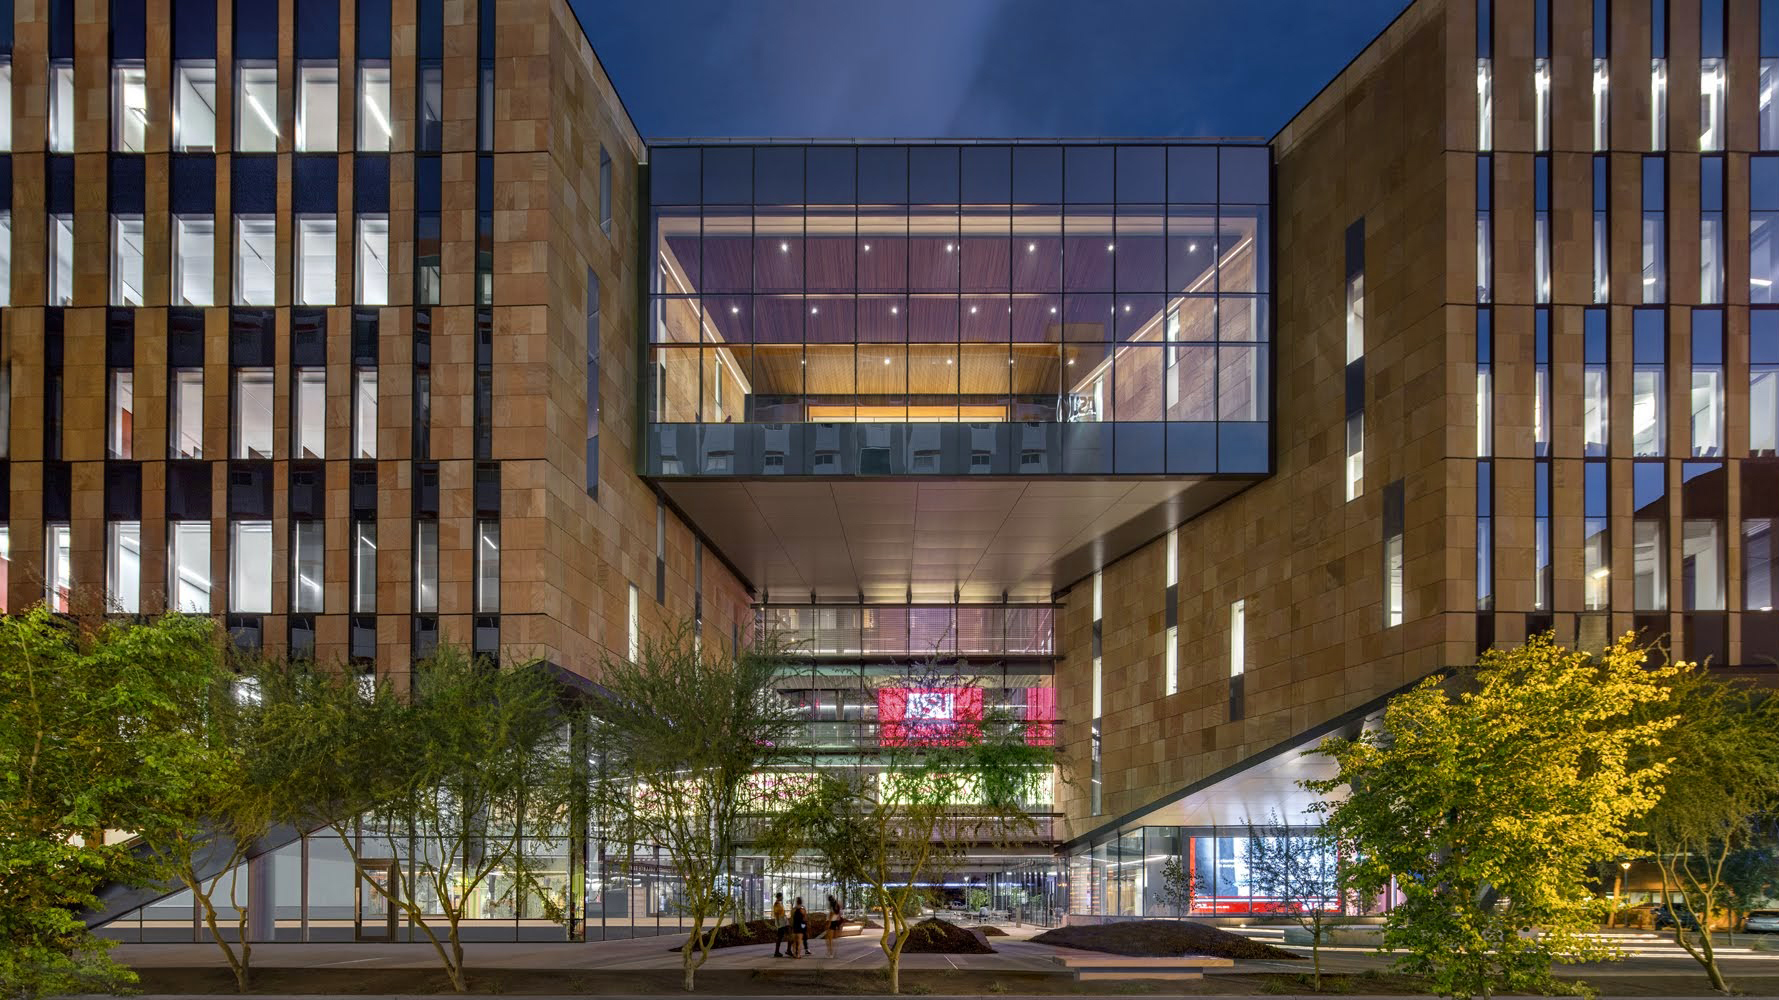 US News and World Report ranks ASU Law No. 25 best law school in the